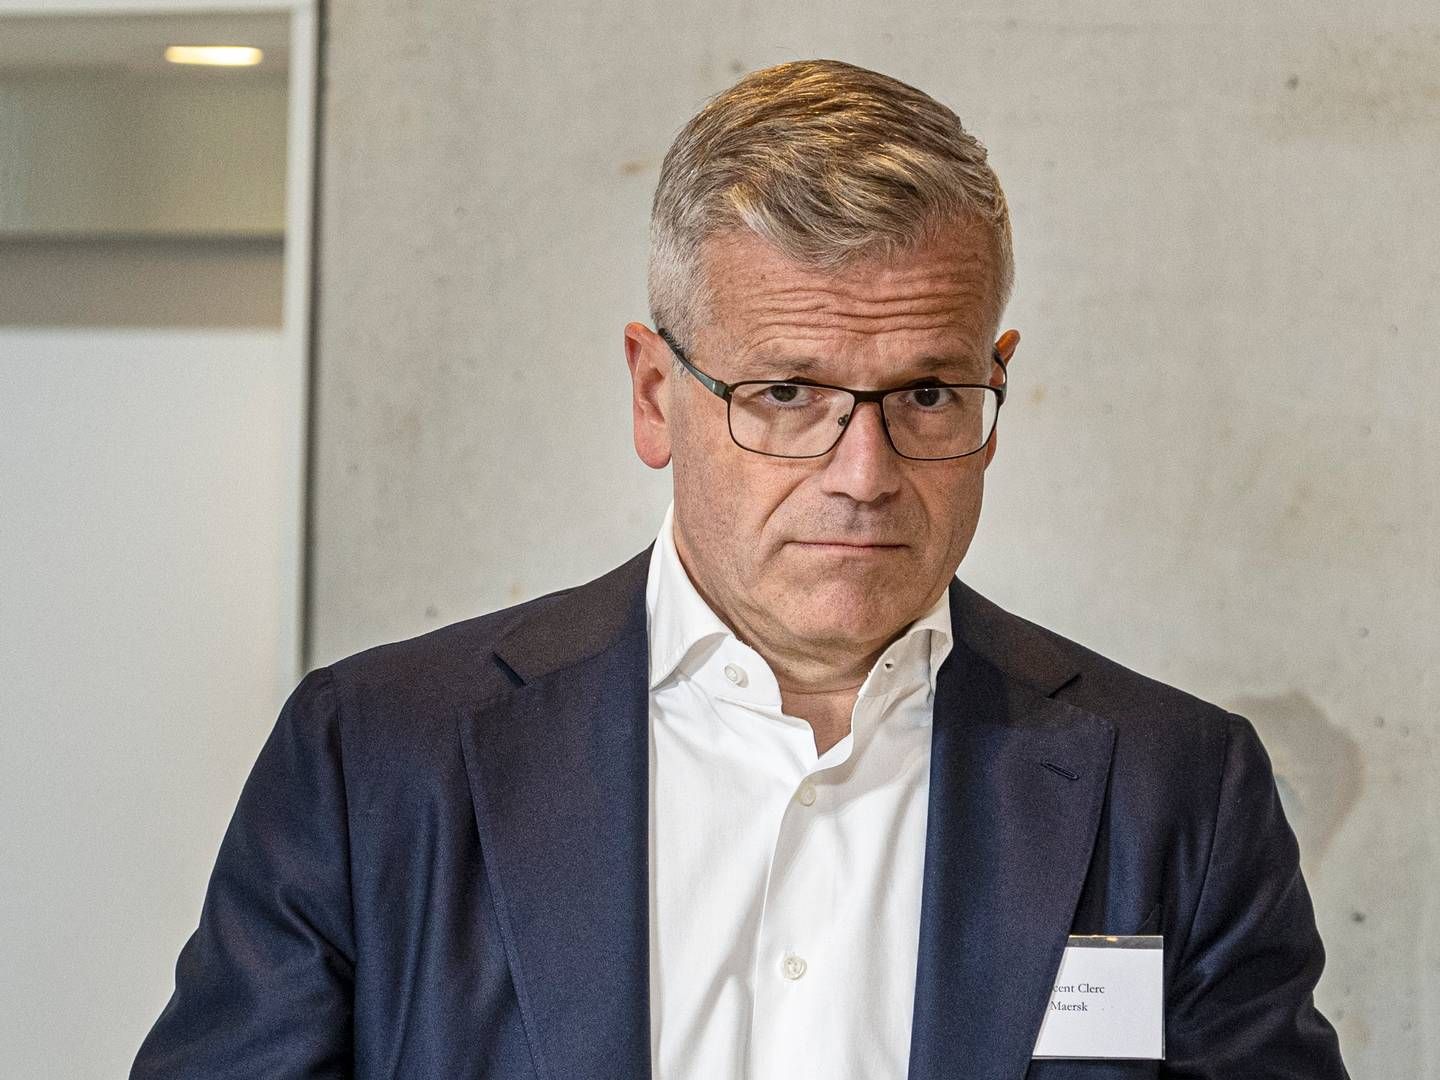 Yesterday, Maersk CEO Vincent Clerc pulled the plug on his ambitions to buy German freight forwarding giant DB Schenker. | Foto: Kenneth Meyer